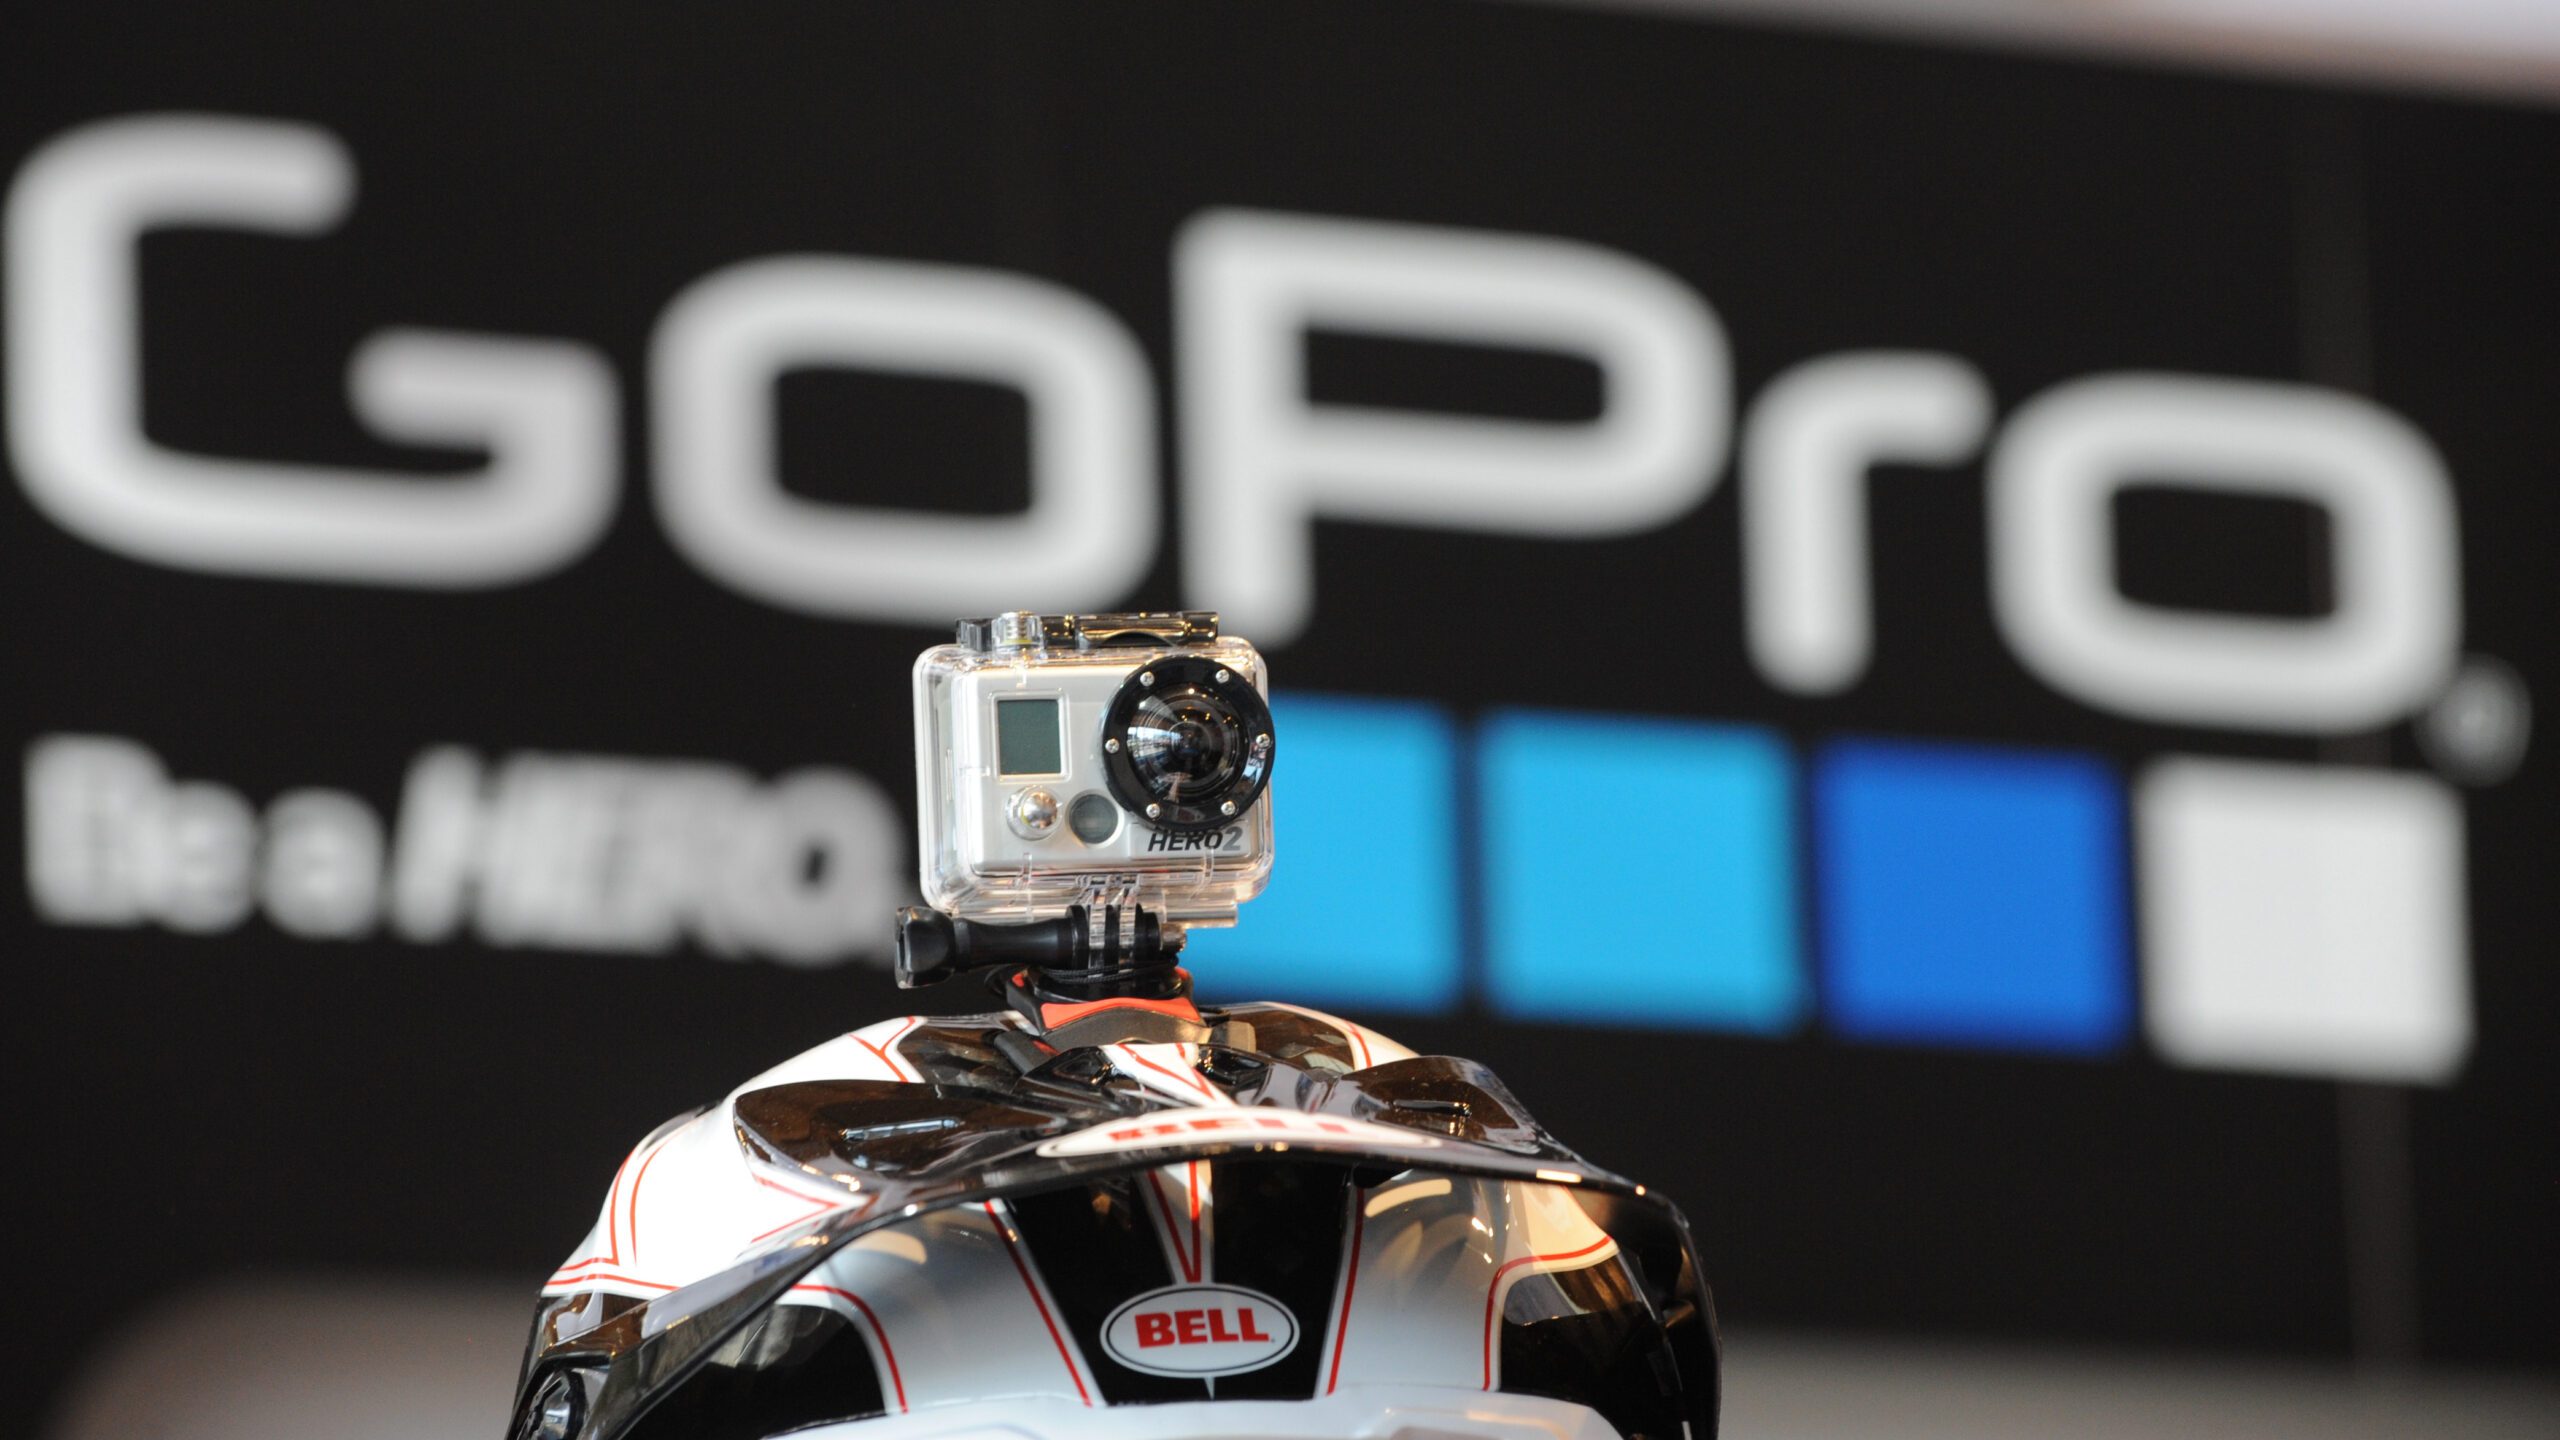 GoPro cutting jobs amid disappointing sales